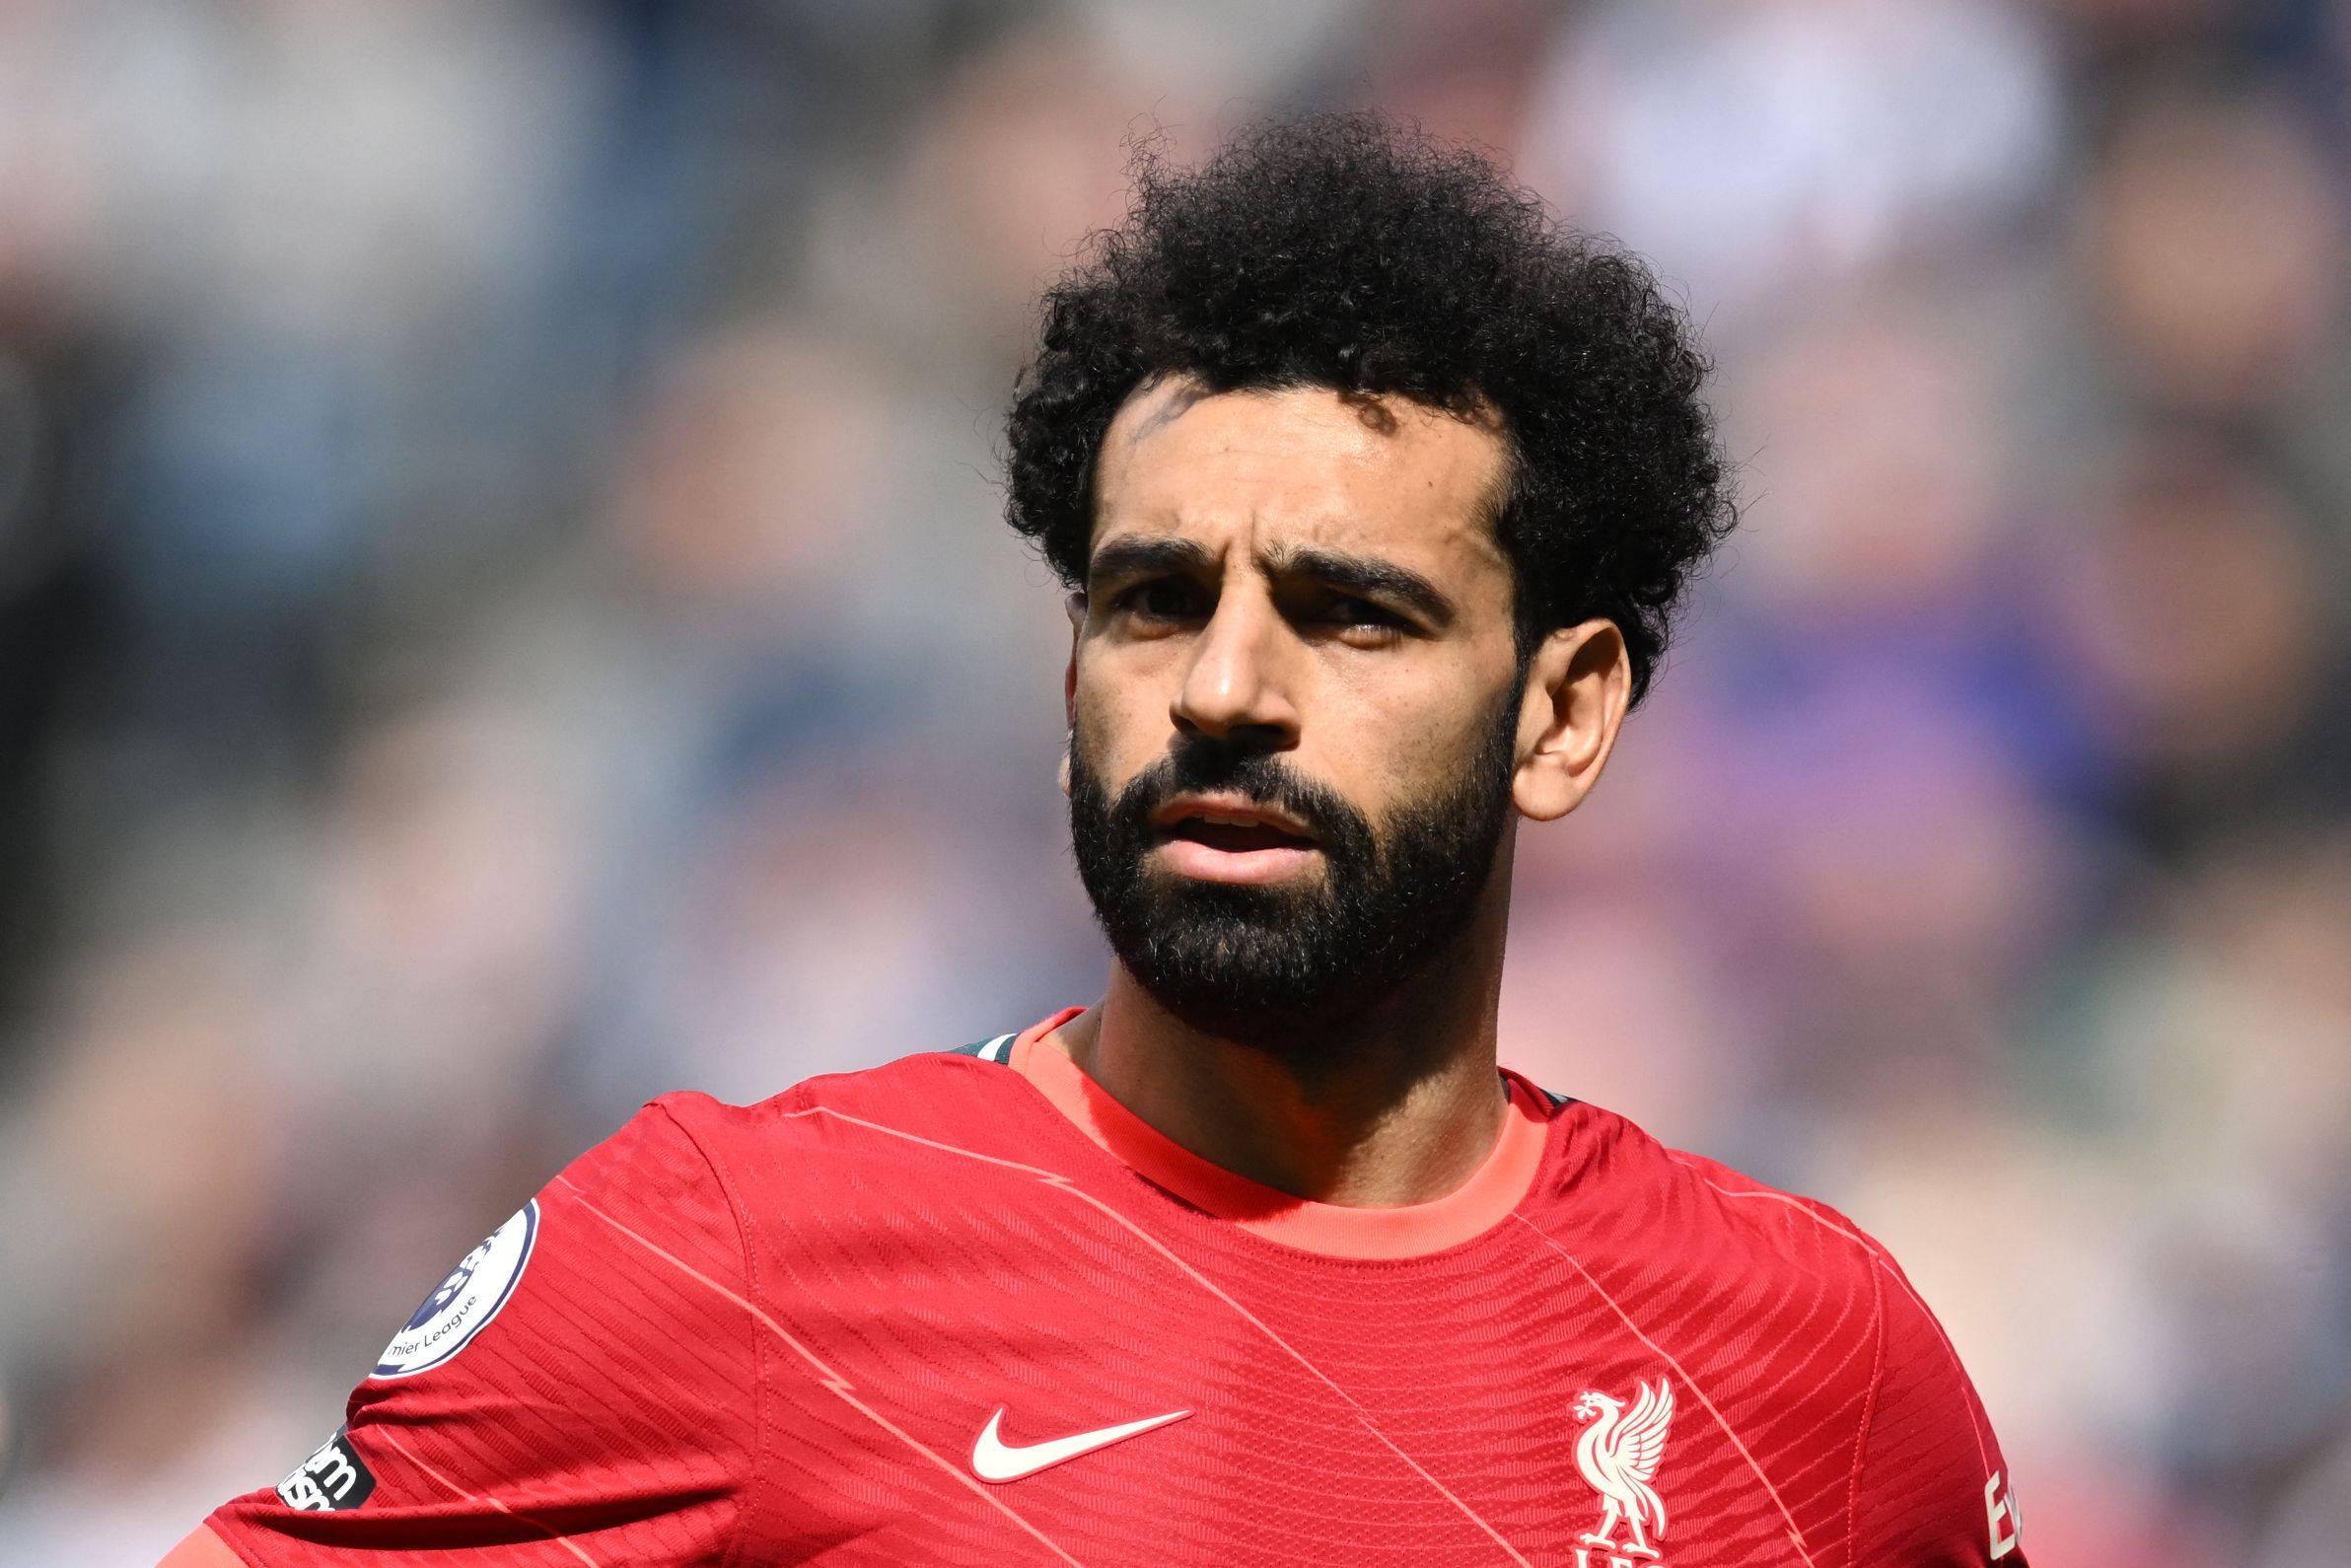 Liverpool's Mohamed Salah out for revenge in Champions League final | The Japan Times